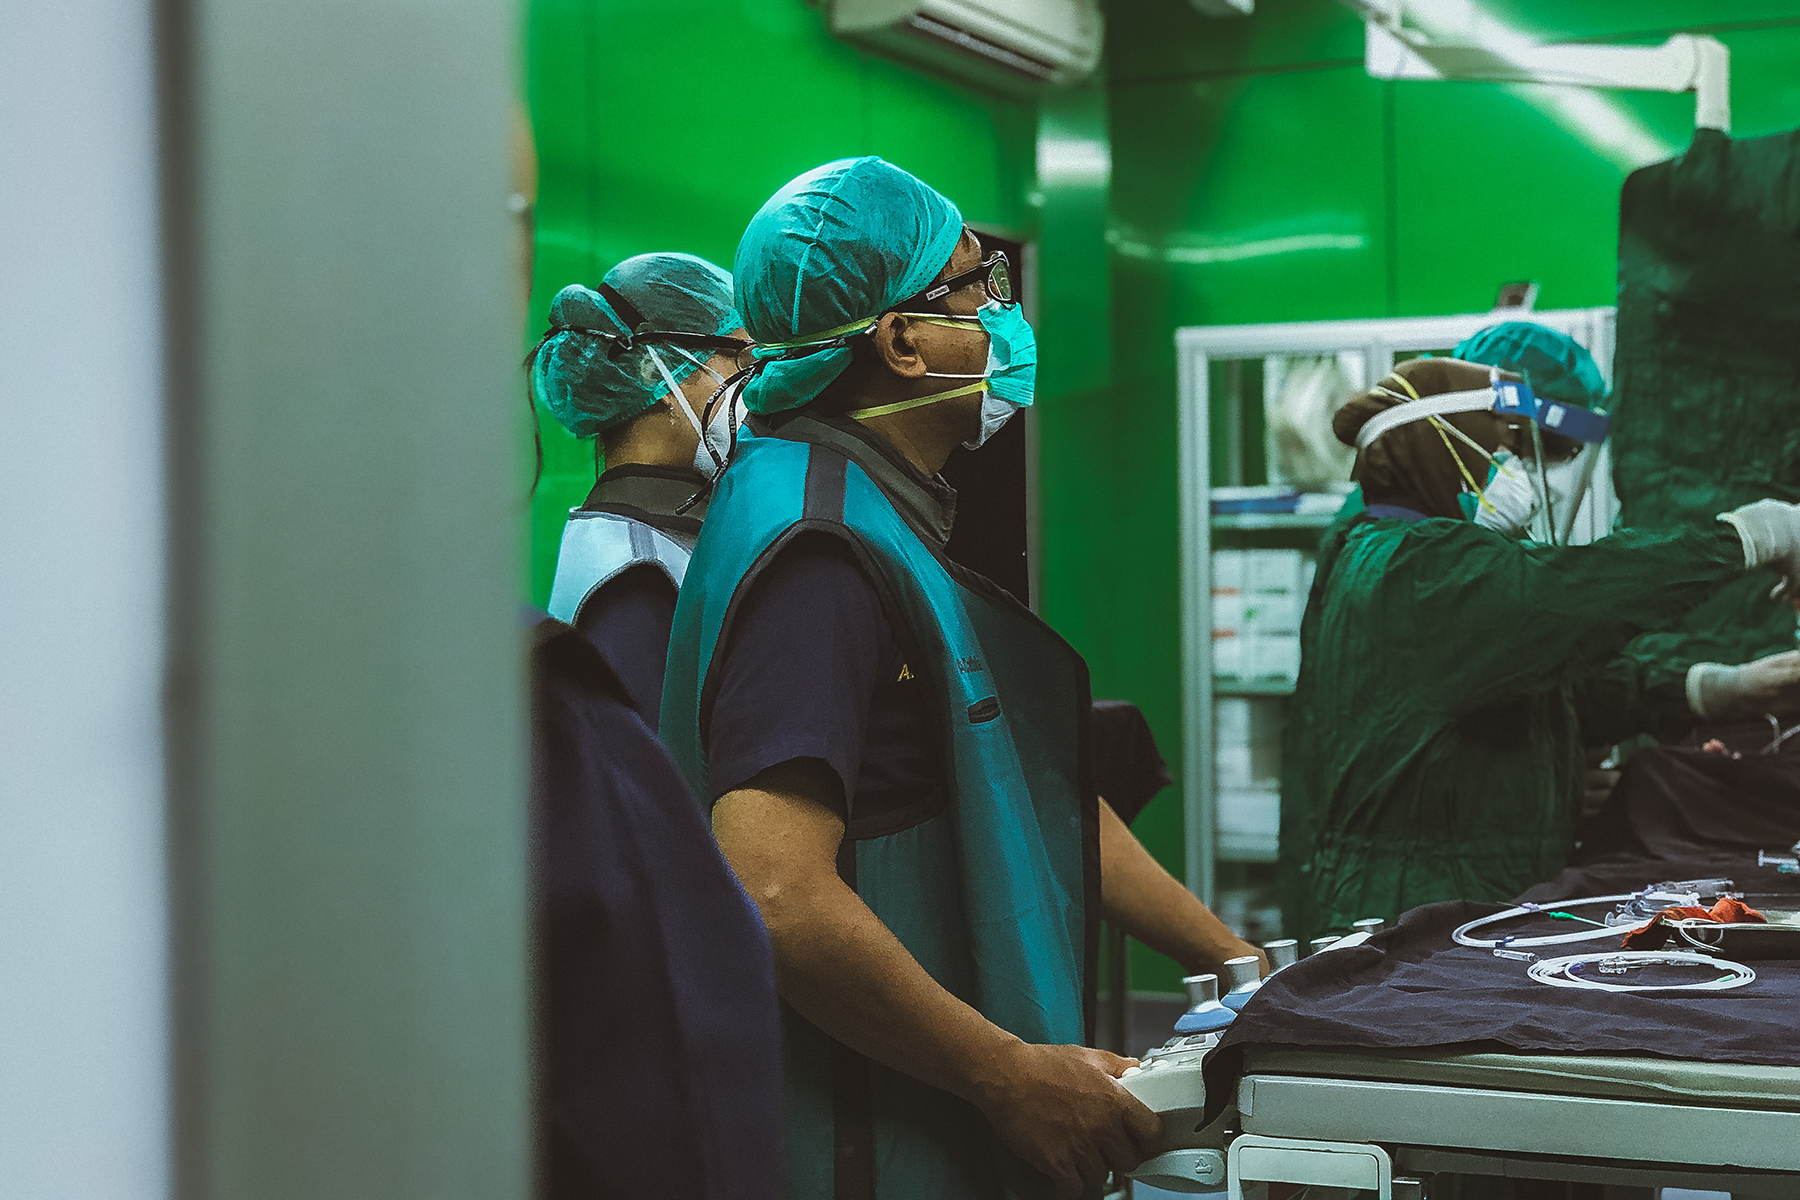 Surgeons in an operating theater